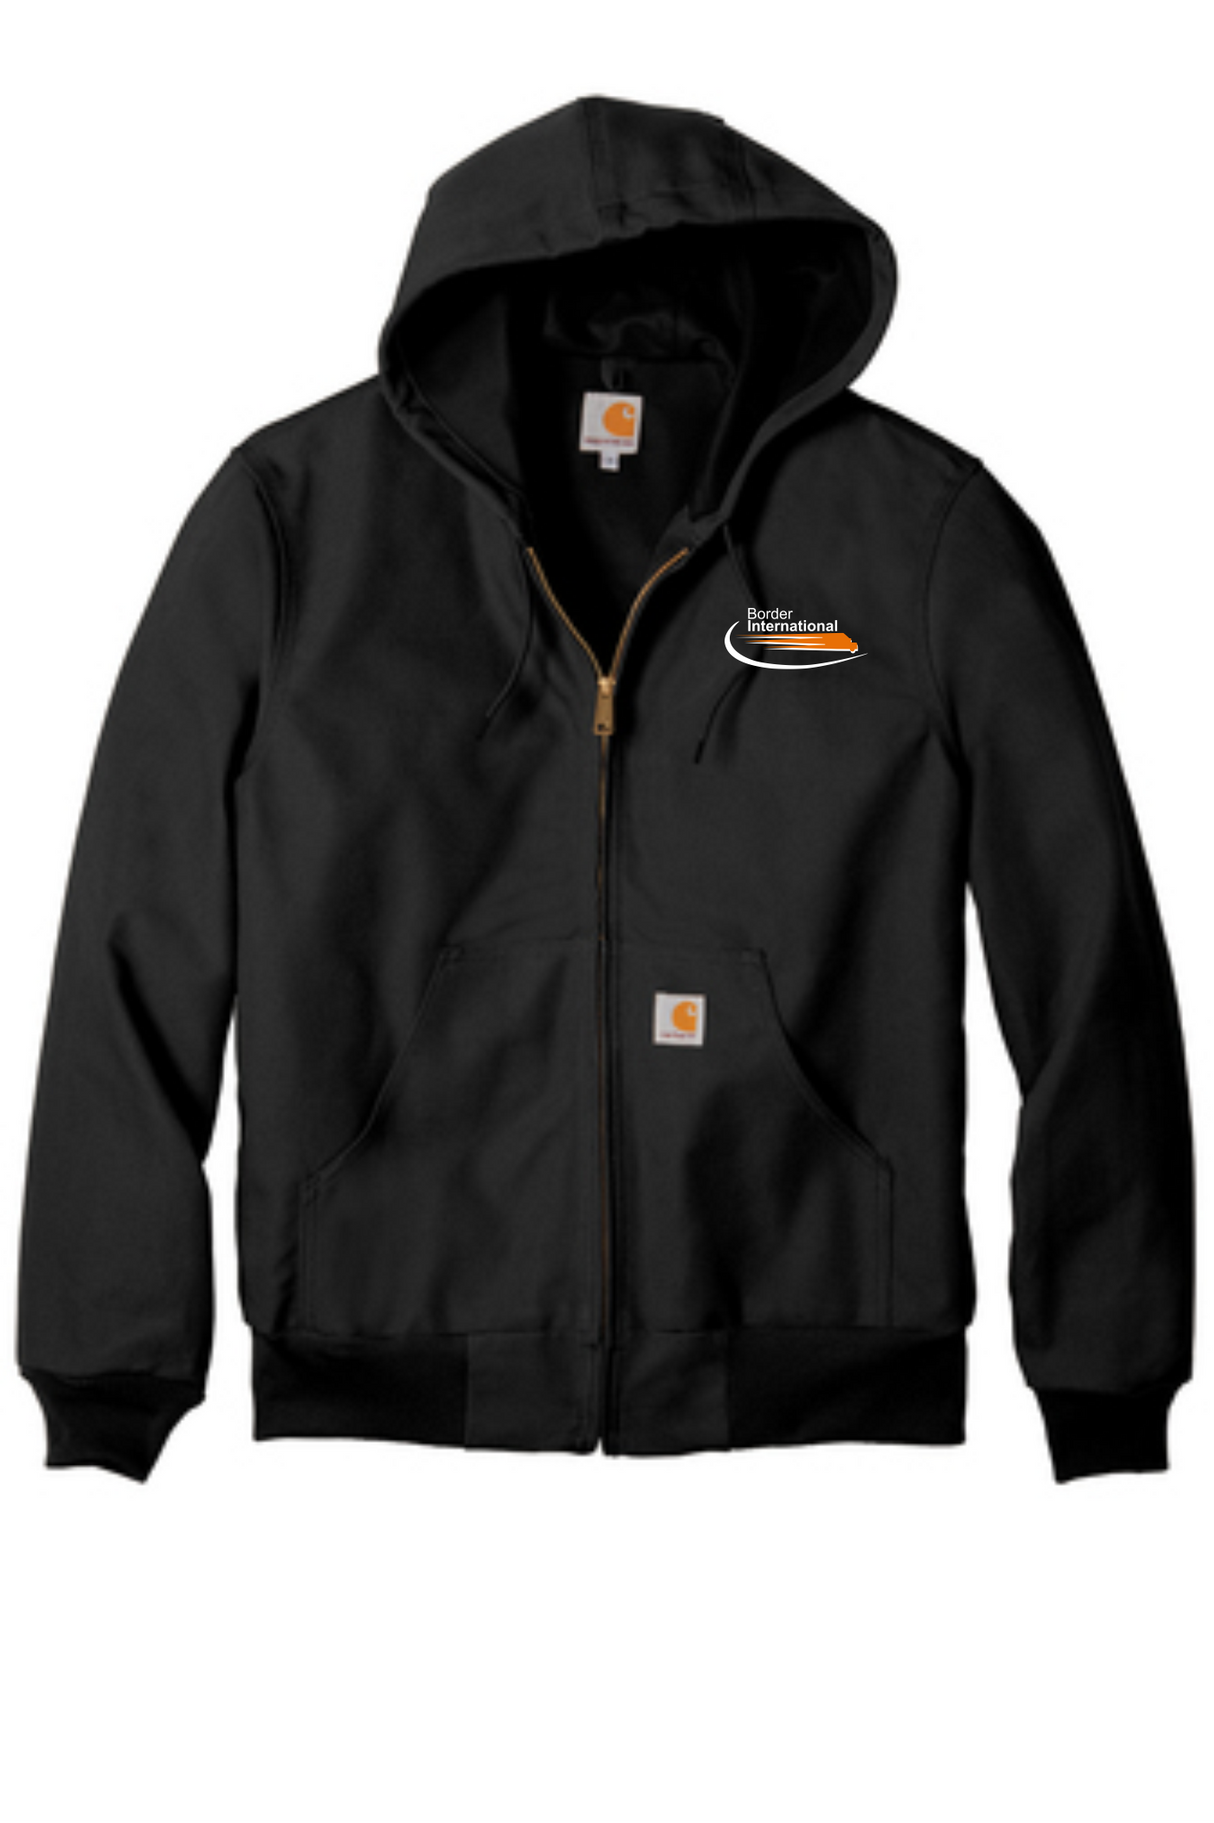 Border International Tall Thermal-Lined Duck Active Jacket